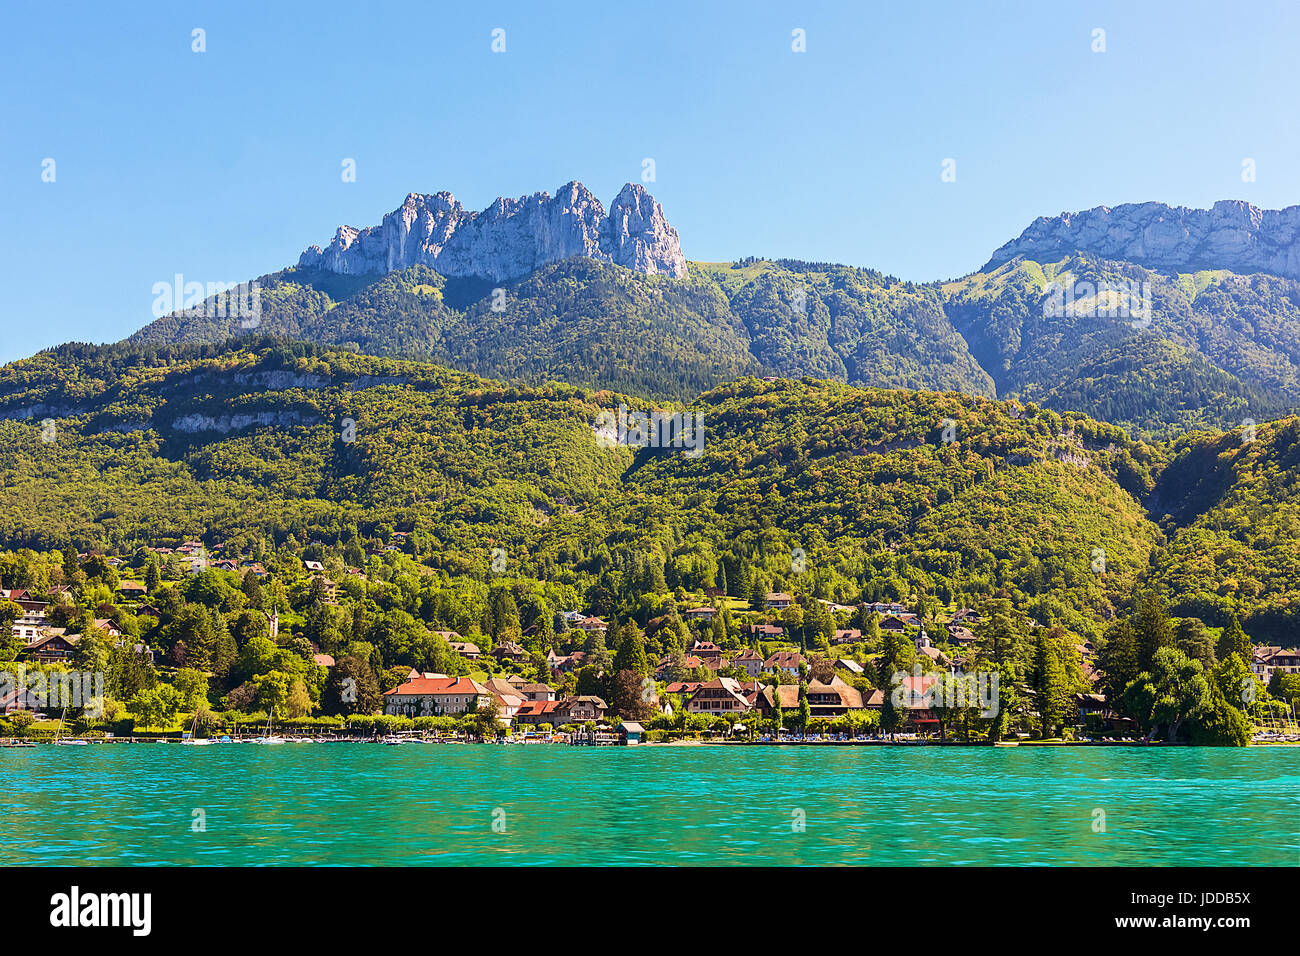 Lake Annecy and Mountain Range, Annecy, France Stock Photo